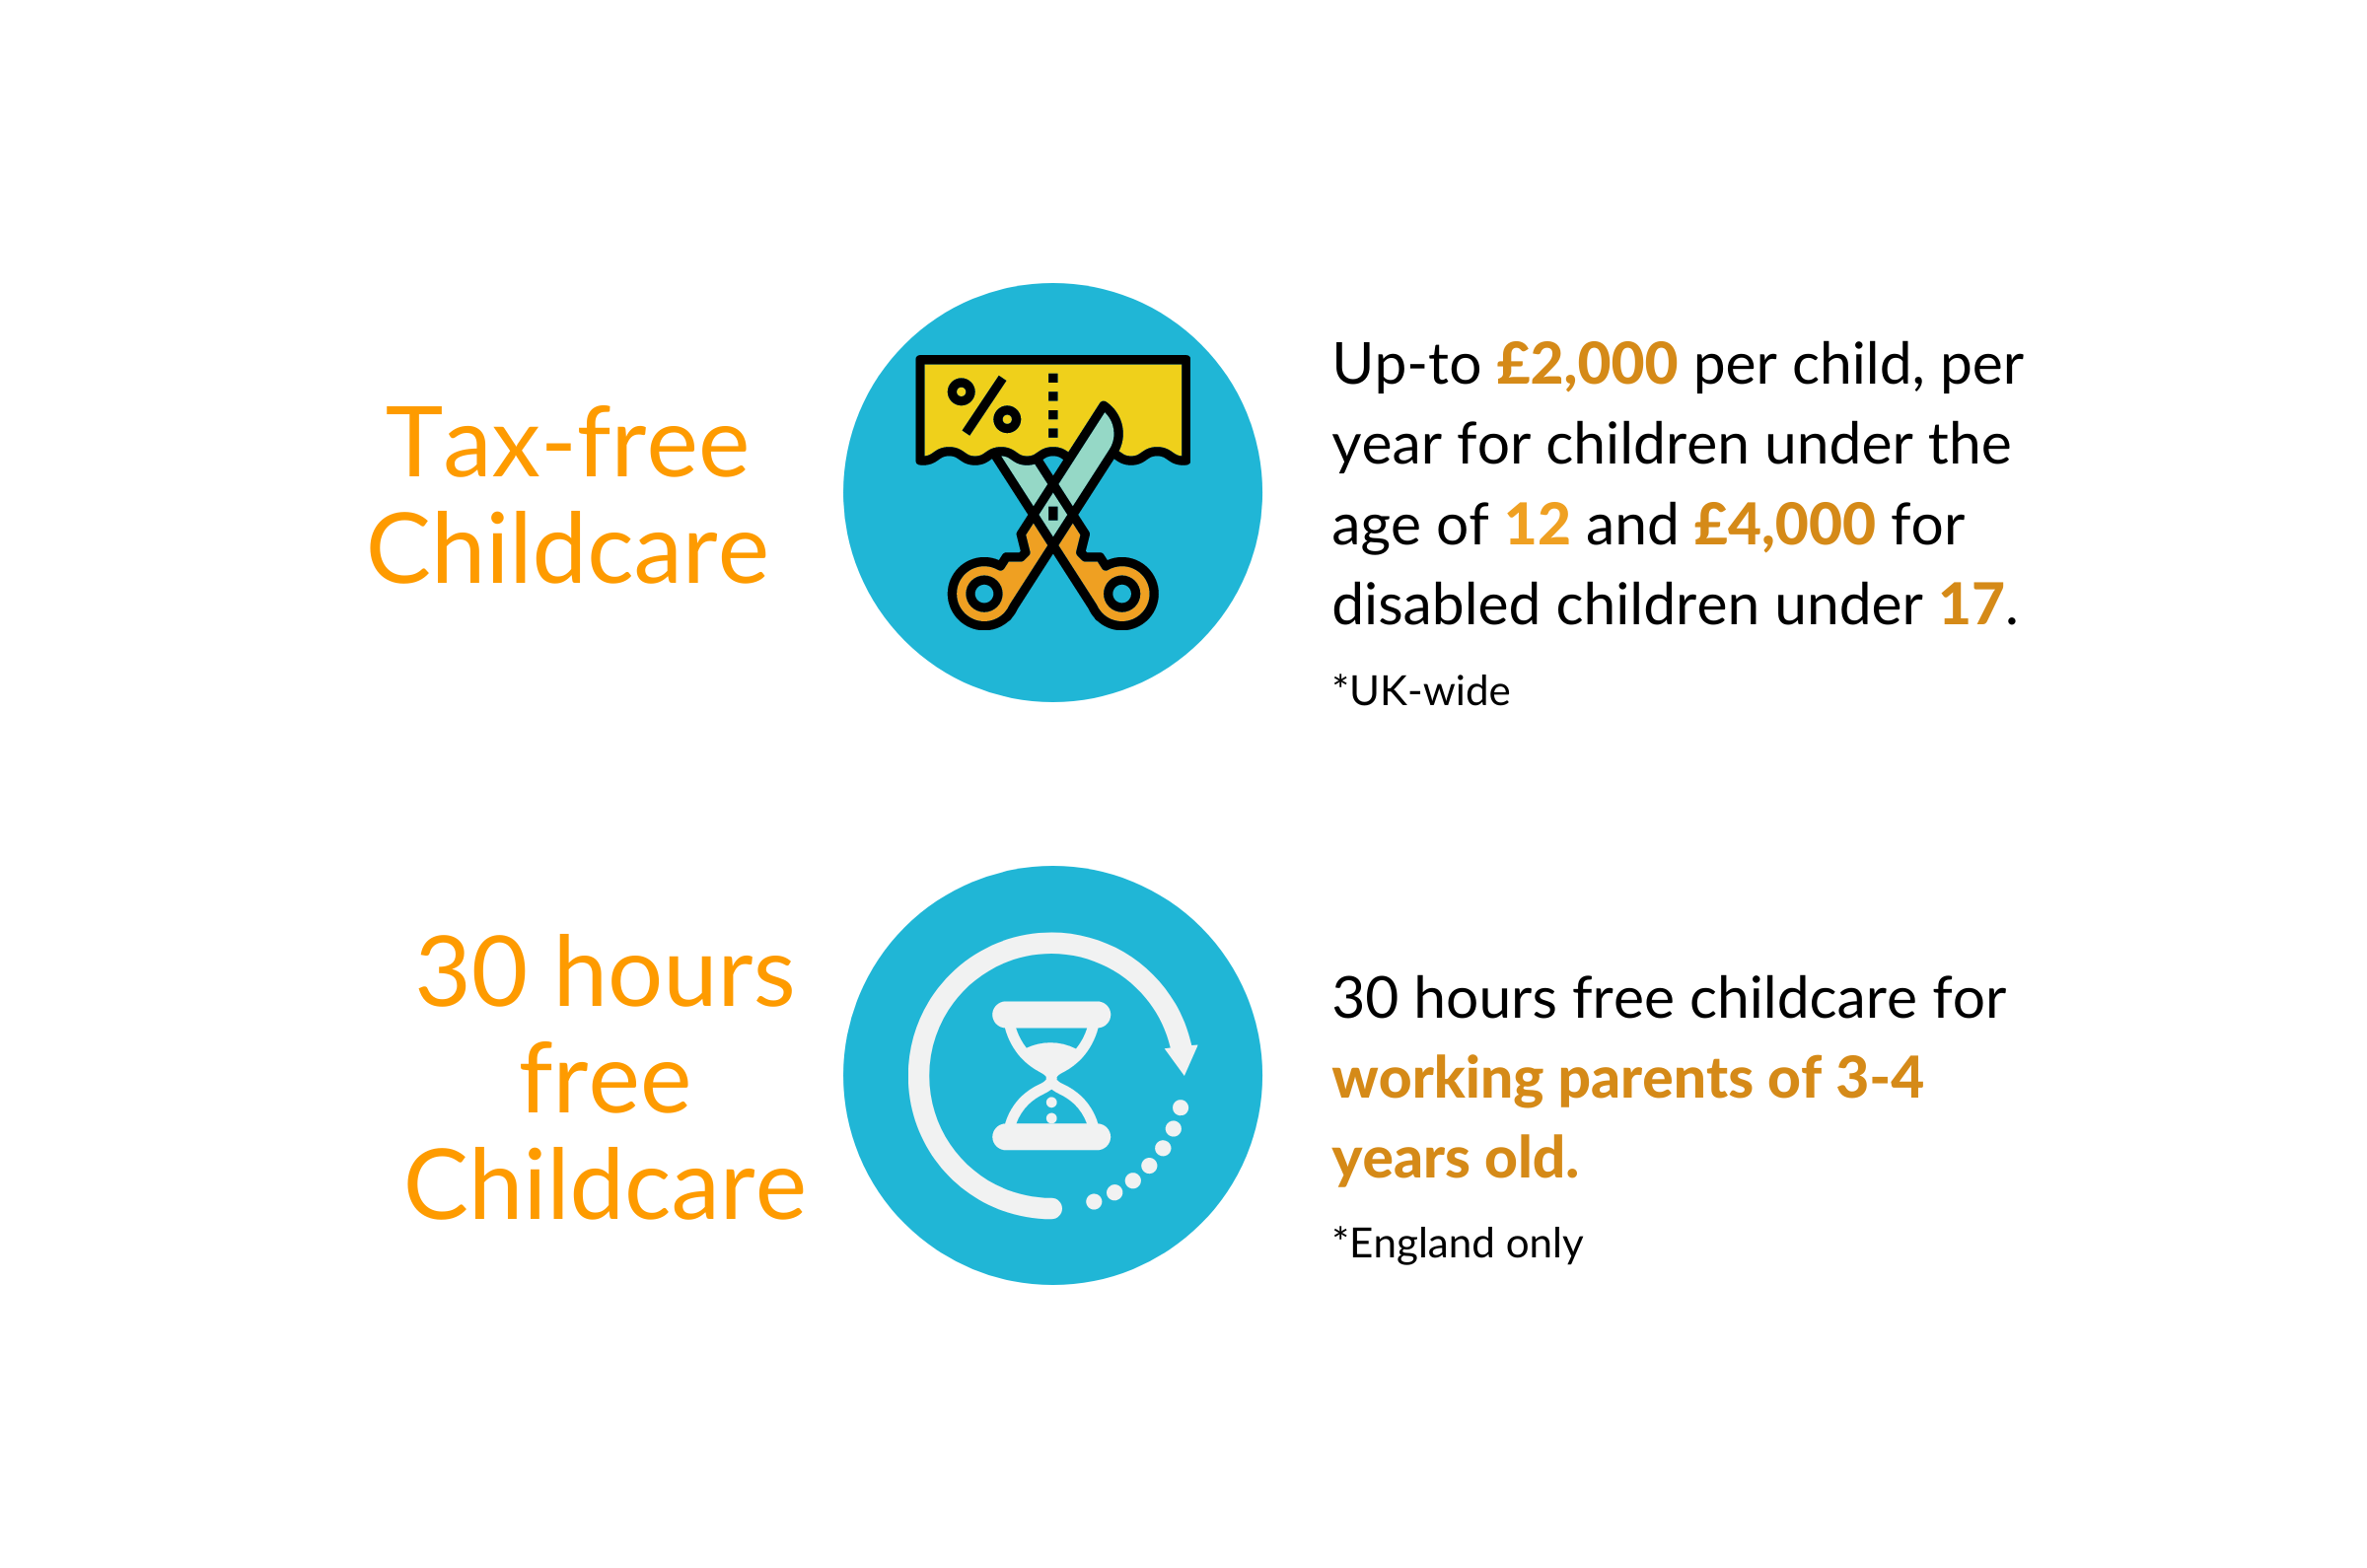 The rules for tax-free childcare